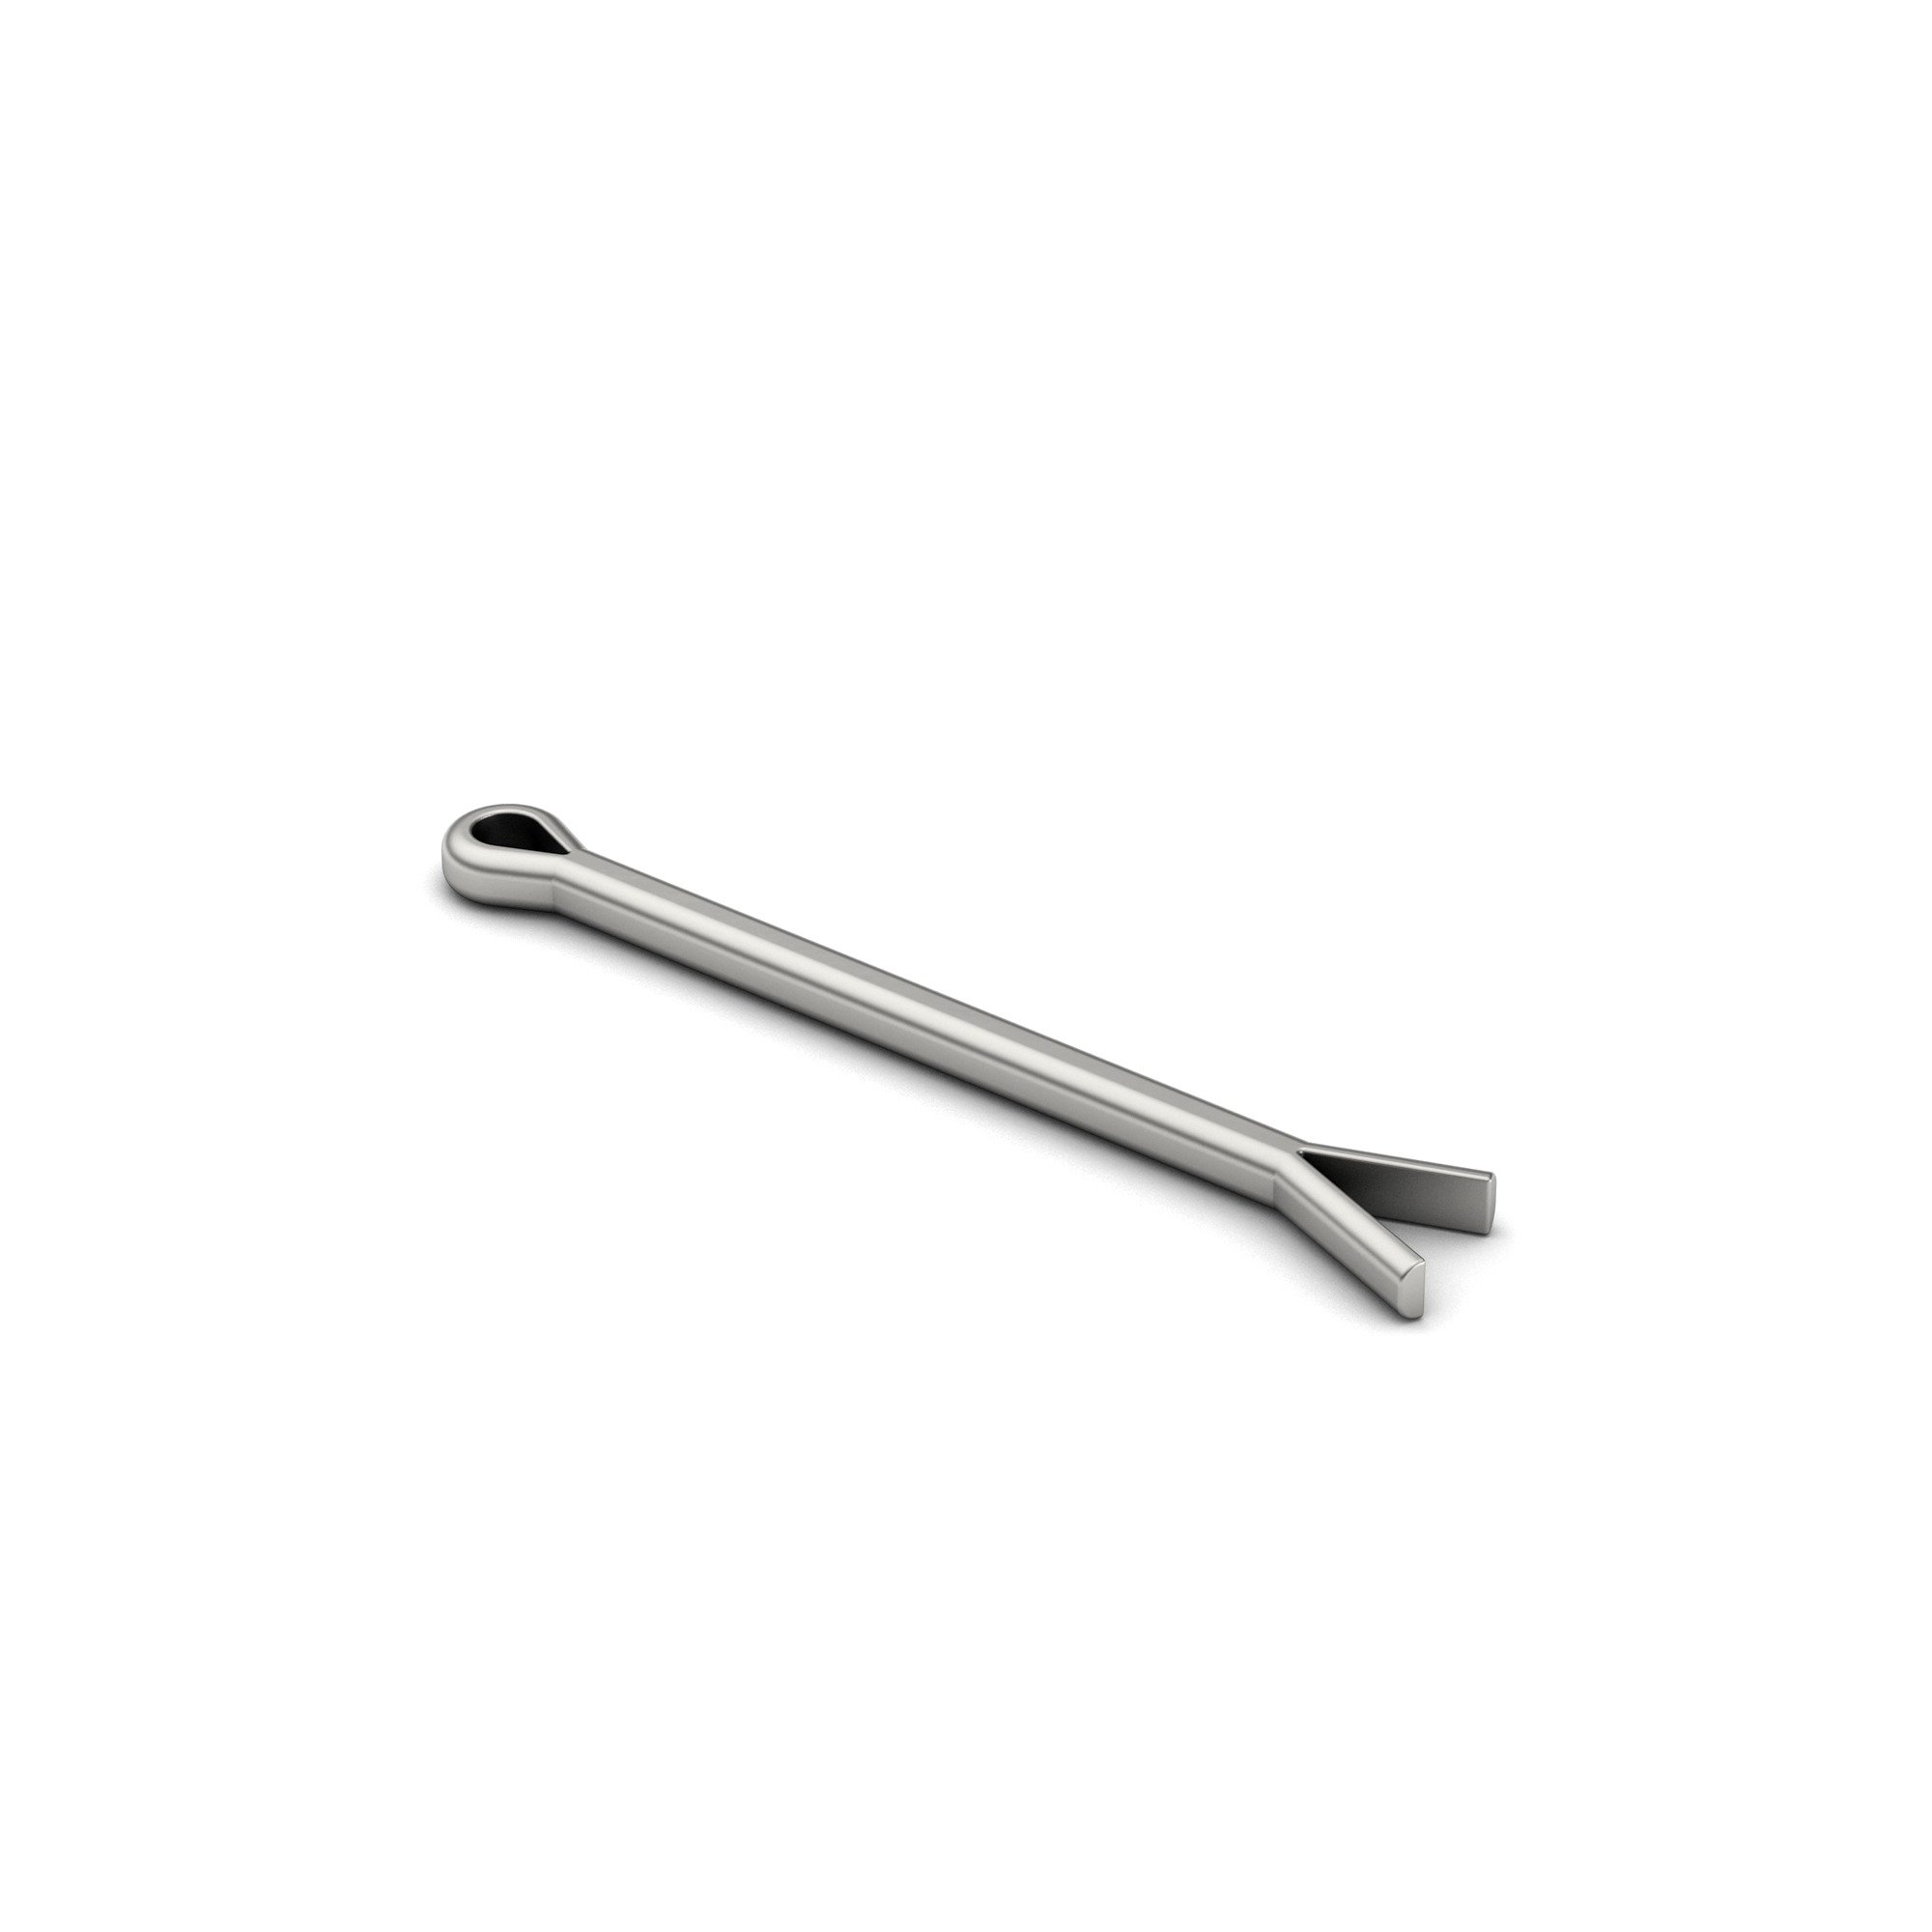 1/8x1 1/2 Carbon Steel Cotter Pin Extended Tip Plain Finish